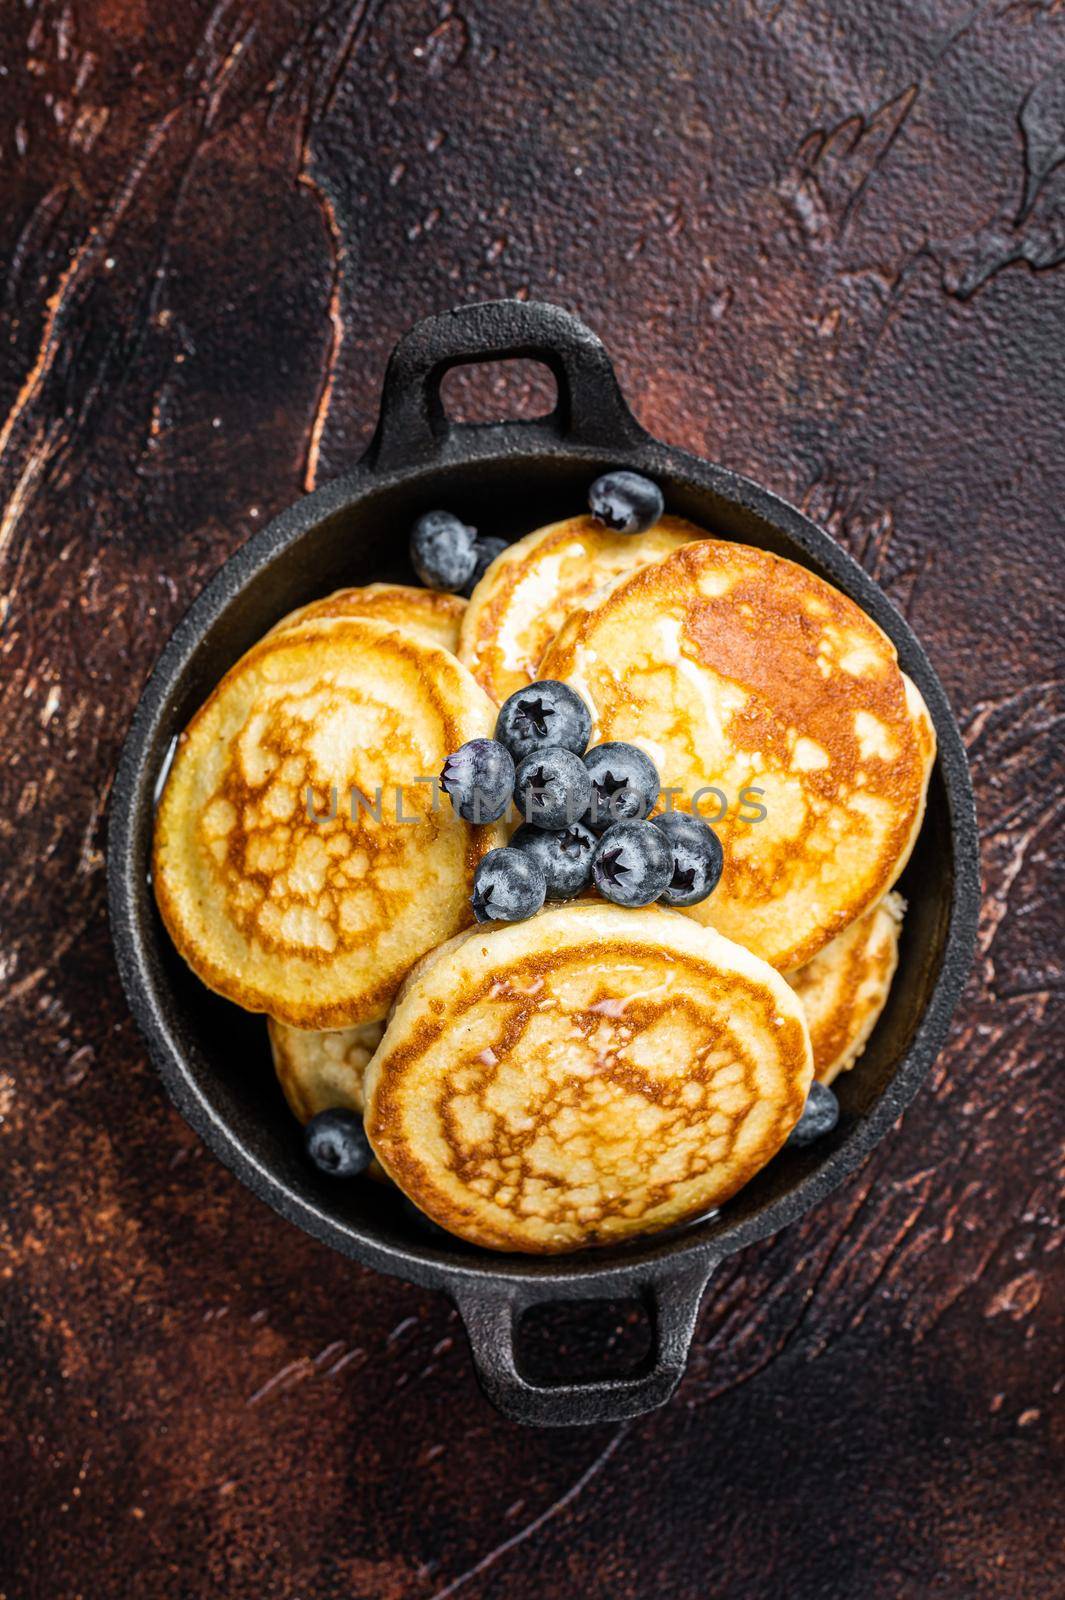 Fried Pancakes with fresh blueberries and maple syrup in a pan. Dark background. Top View.